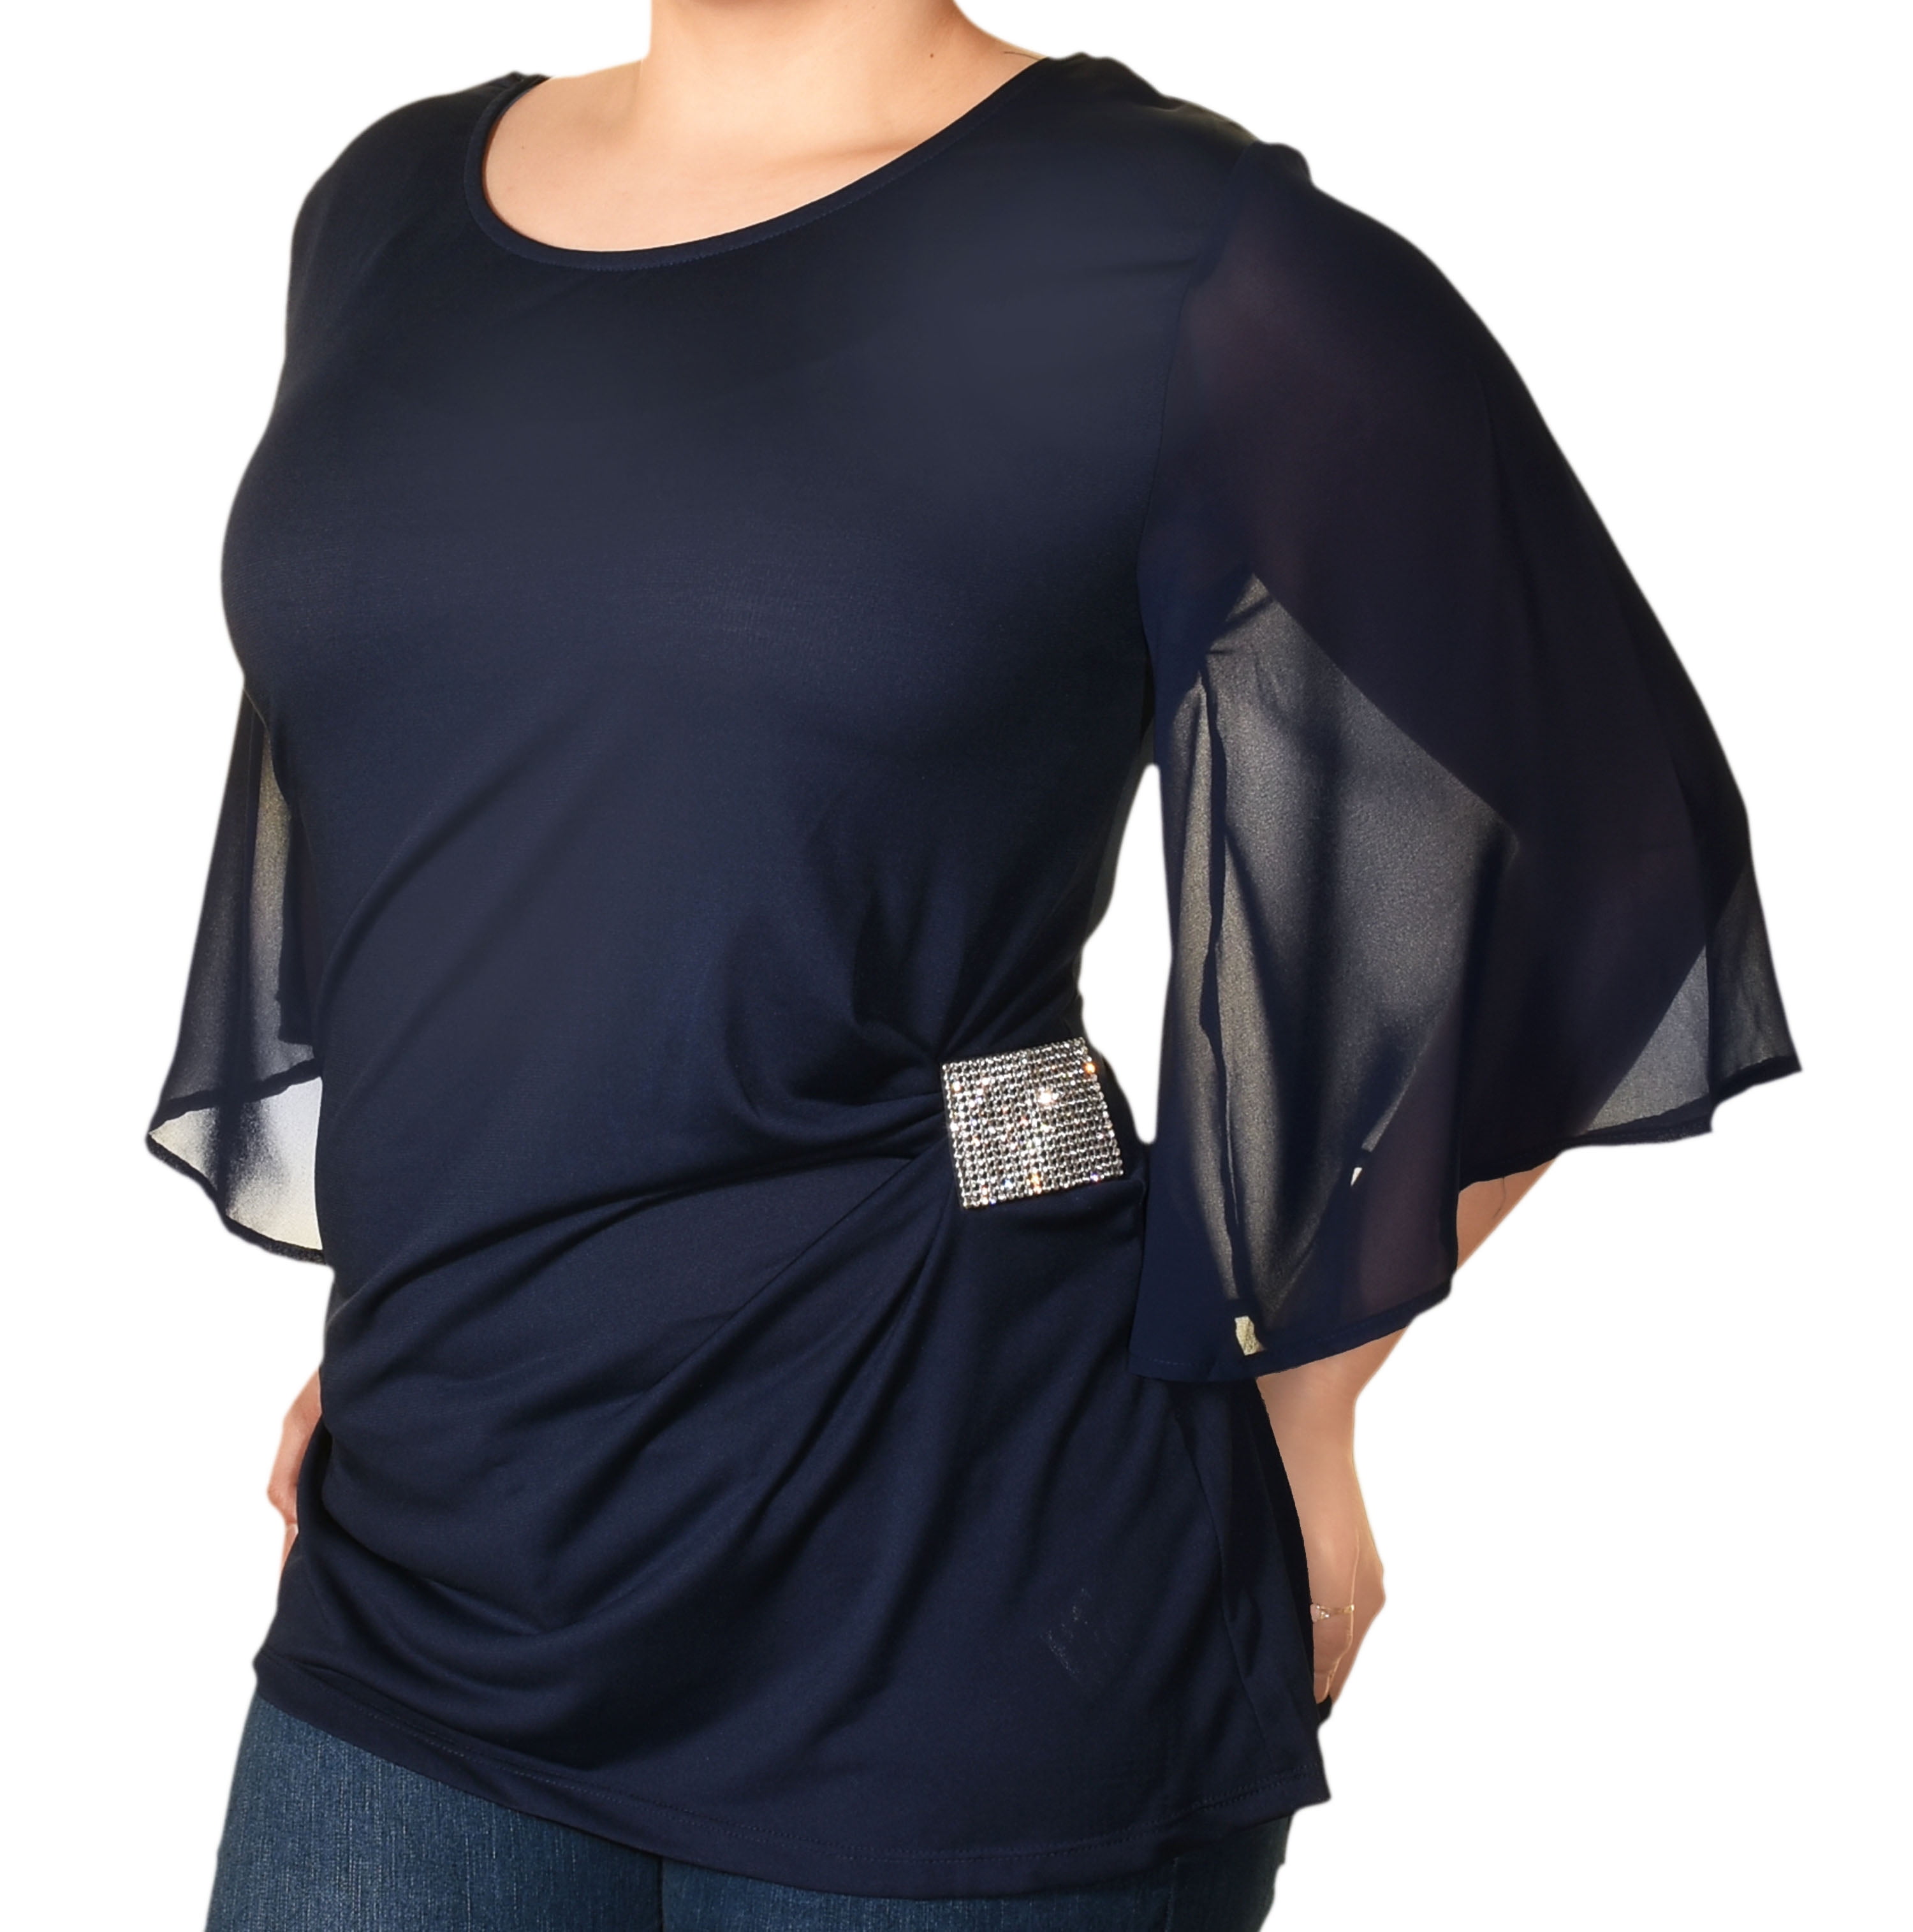 Araza Womens Plus Size Crystal Ruched Cocktail Shirt - Walmart.com